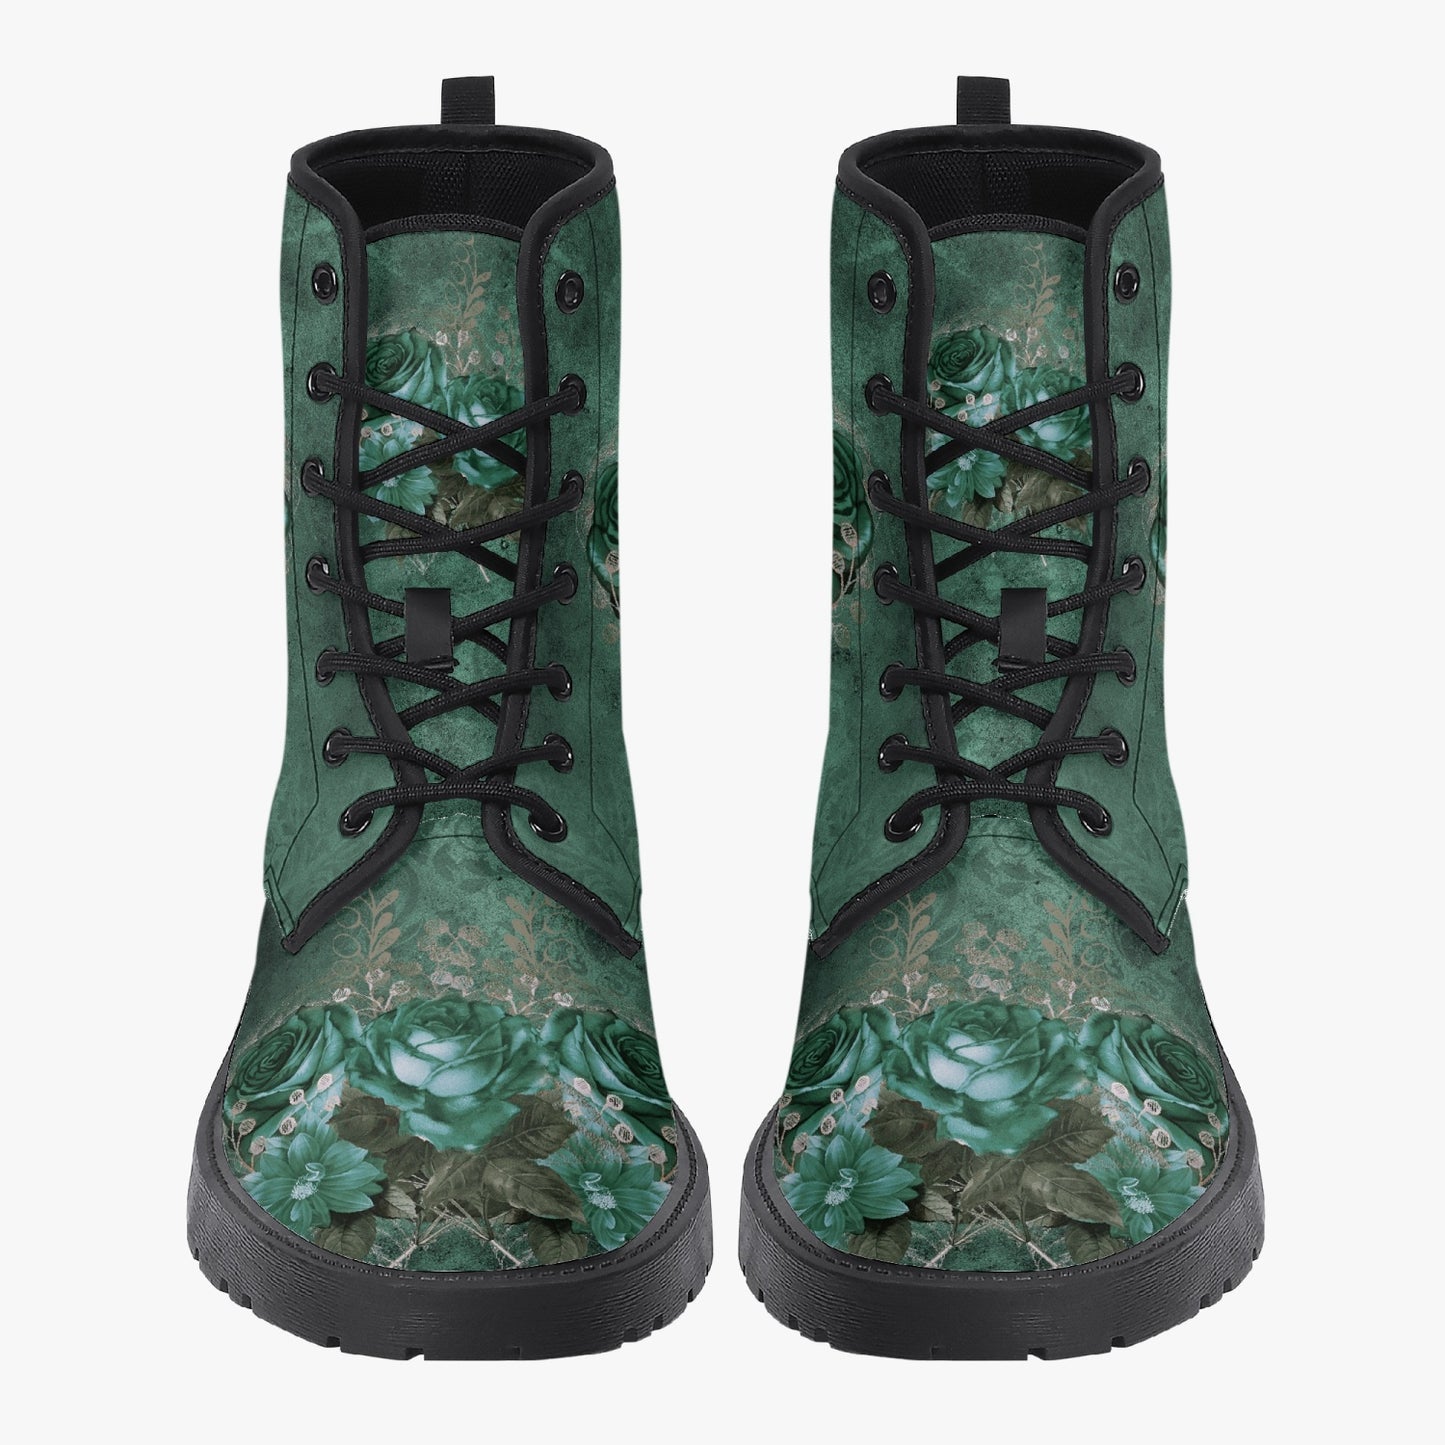 Gothic Green Roses Floral Vegan Leather Combat Boots - Dark Victorian Lace up Boots (JPREG72)